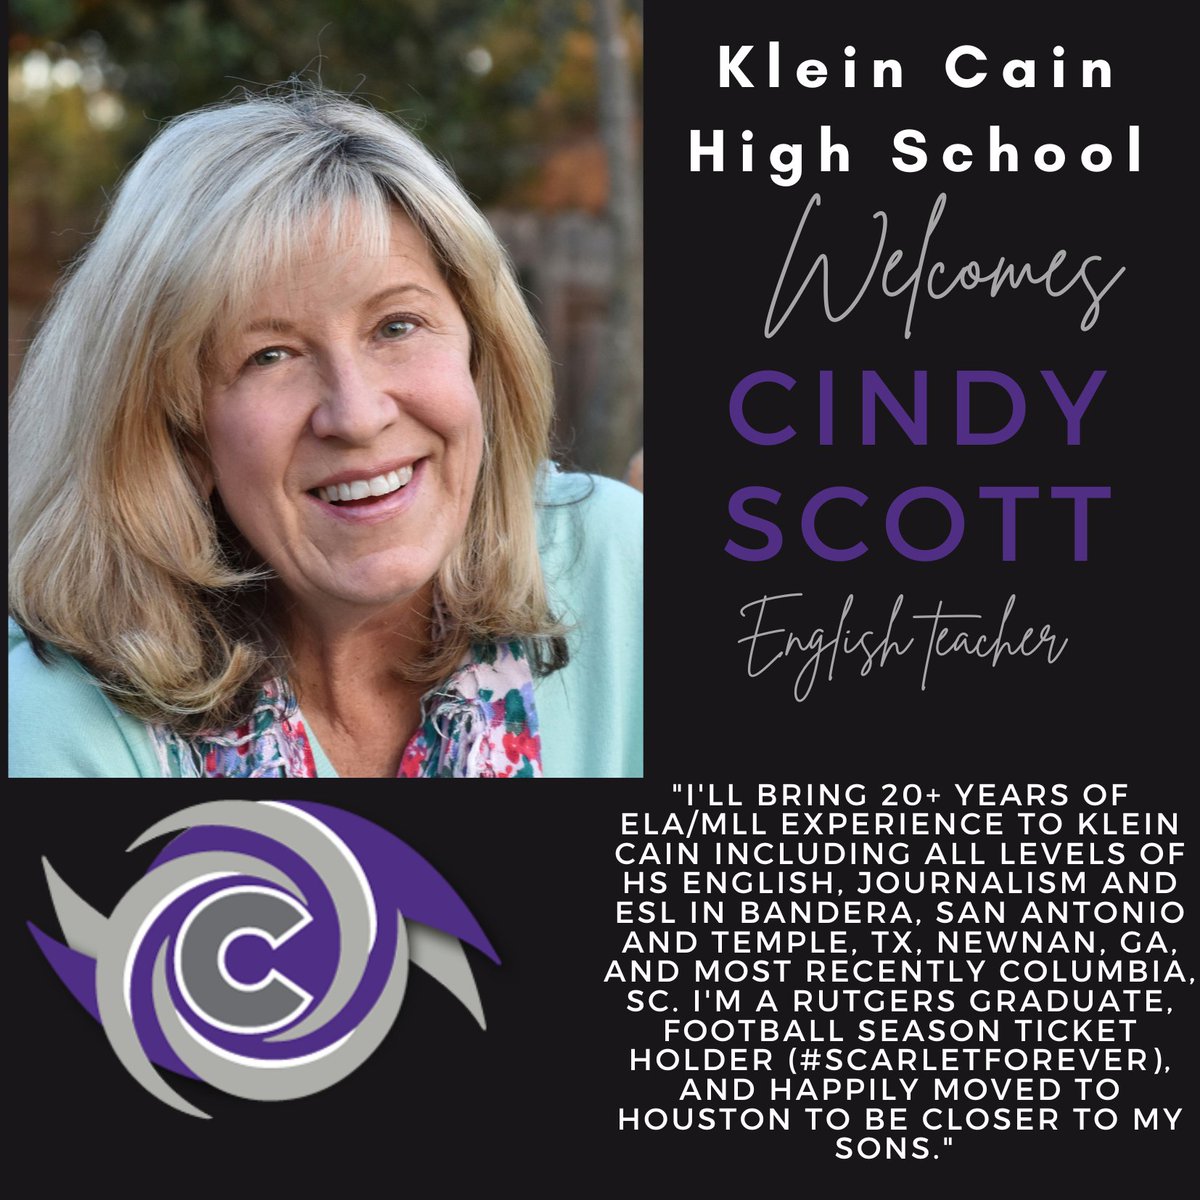 Let's give a warm Hurricane welcome to Cindy Scott!